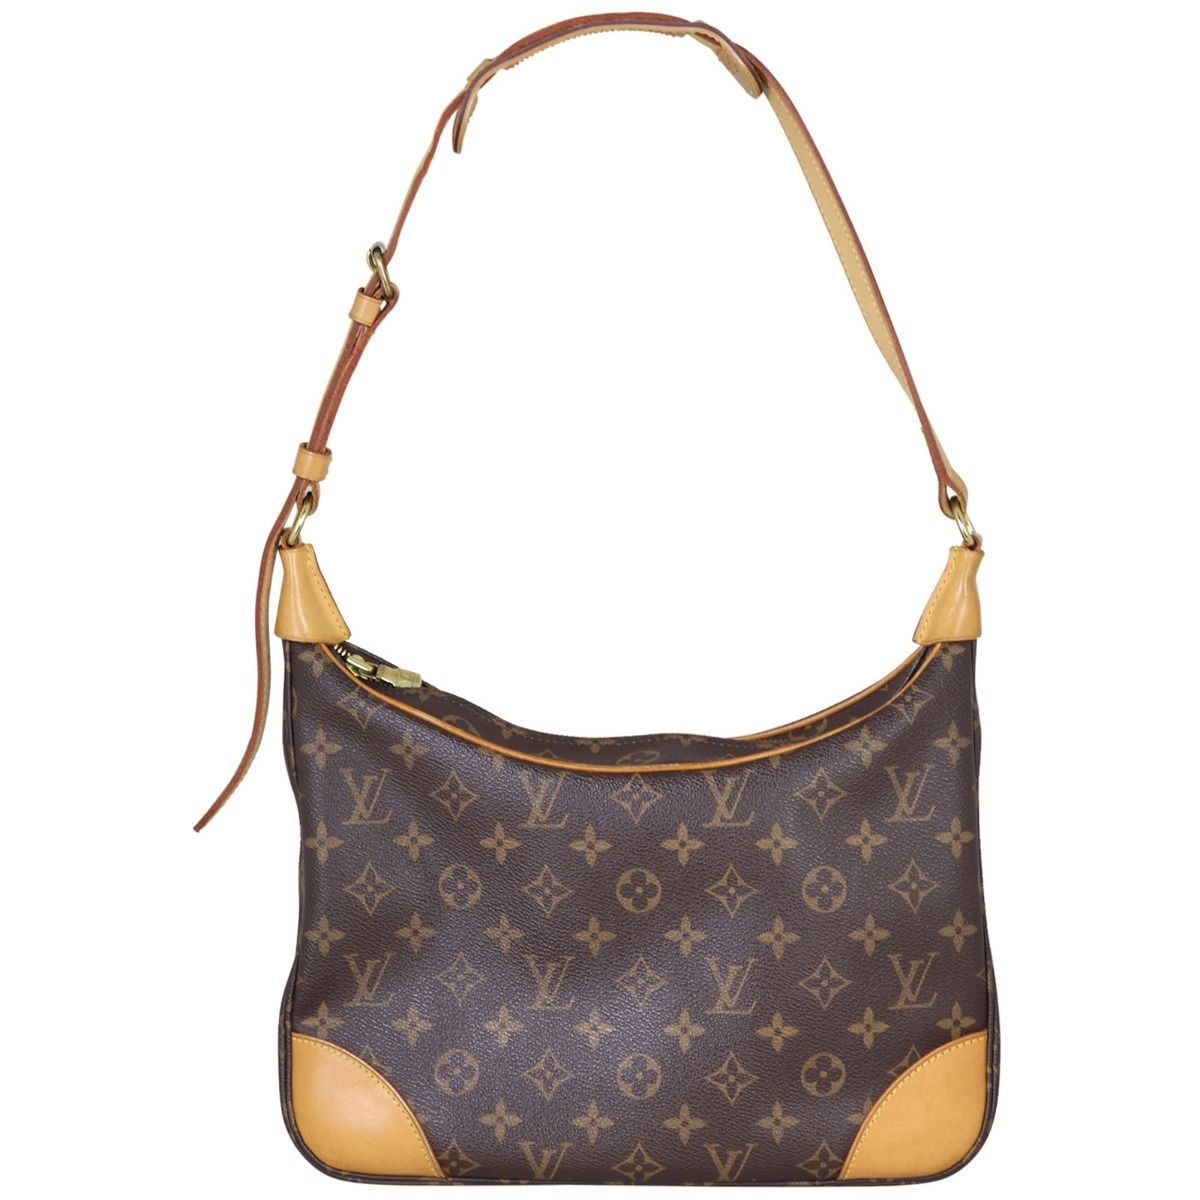 LOUIS VUITTON BOULGNE REVIEW, WHERE HAVE I BEEN?